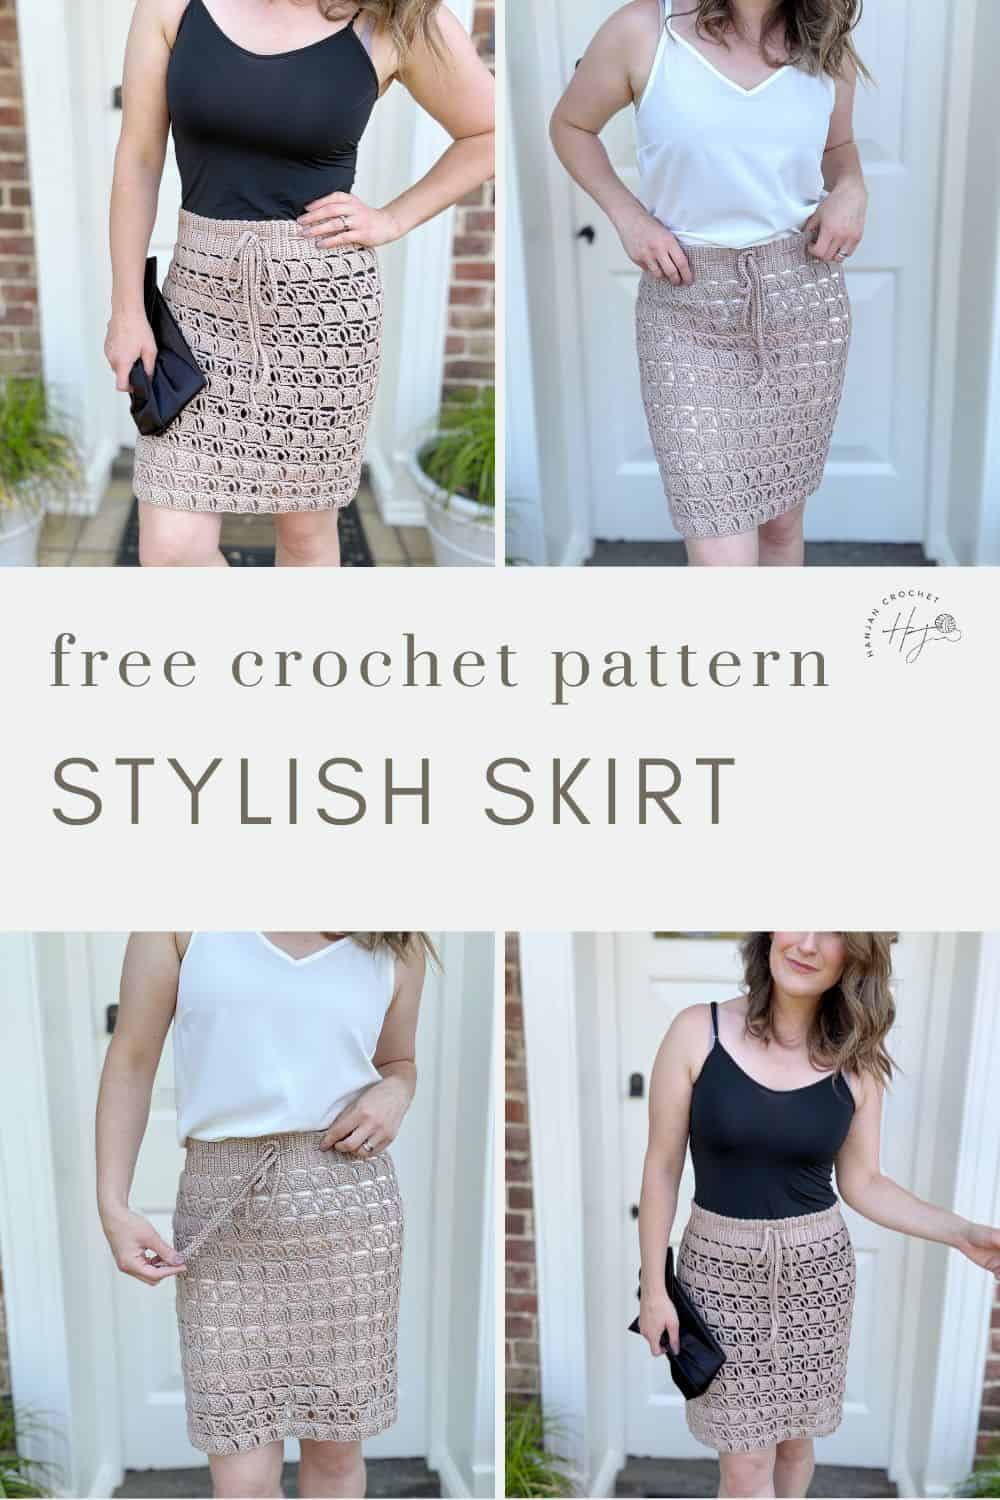 Four pictures showcasing a crocheted skirt worn with different tops. The text reads "free crochet skirt pattern, stylish skirt.